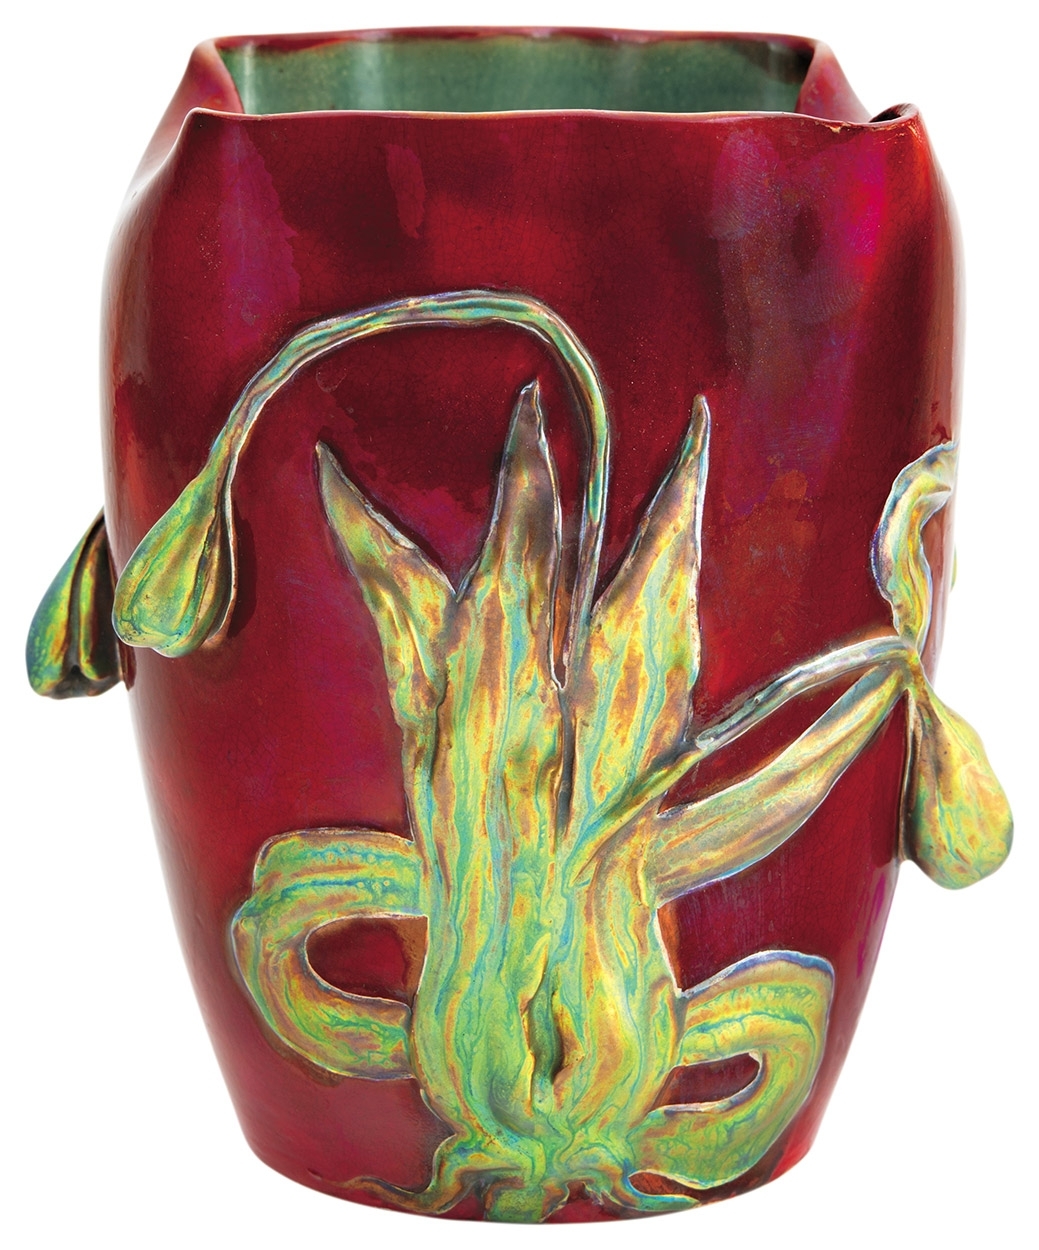 Zsolnay Decor Bowl with Tulip-string Embossing, Zsolnay, 1900